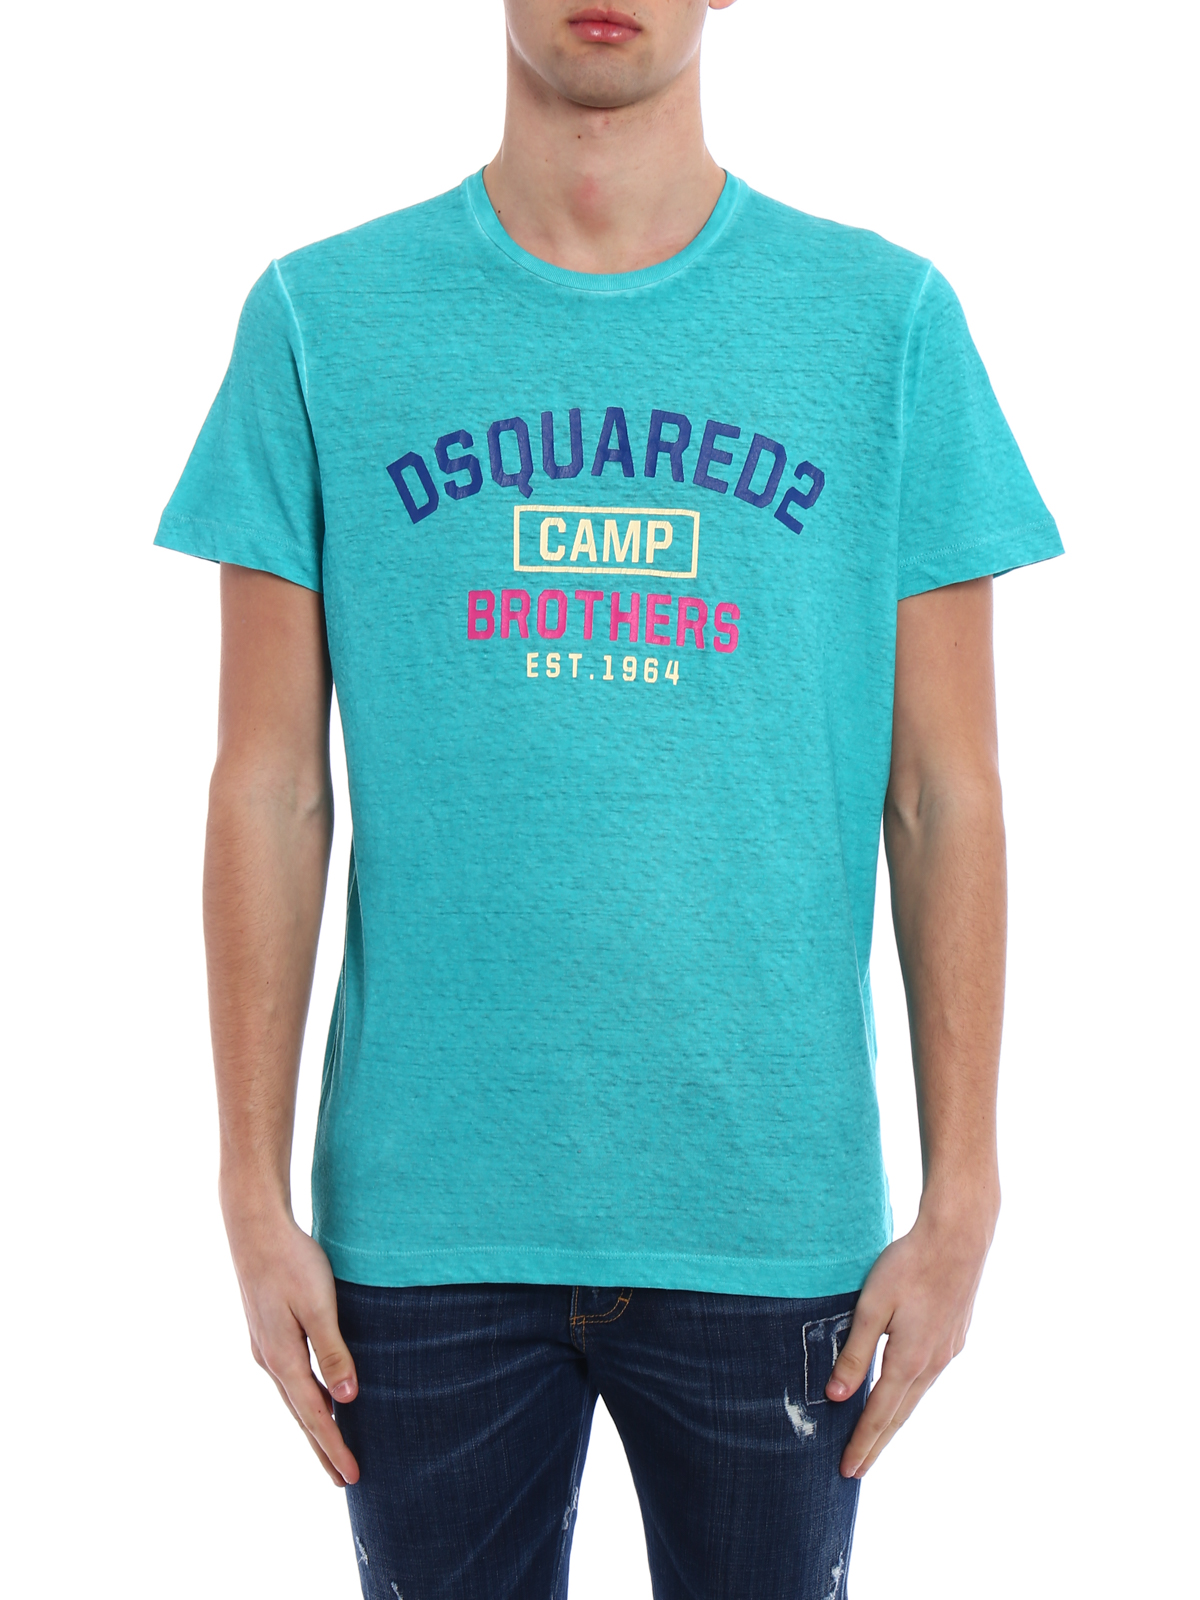 dsquared t shirt brothers